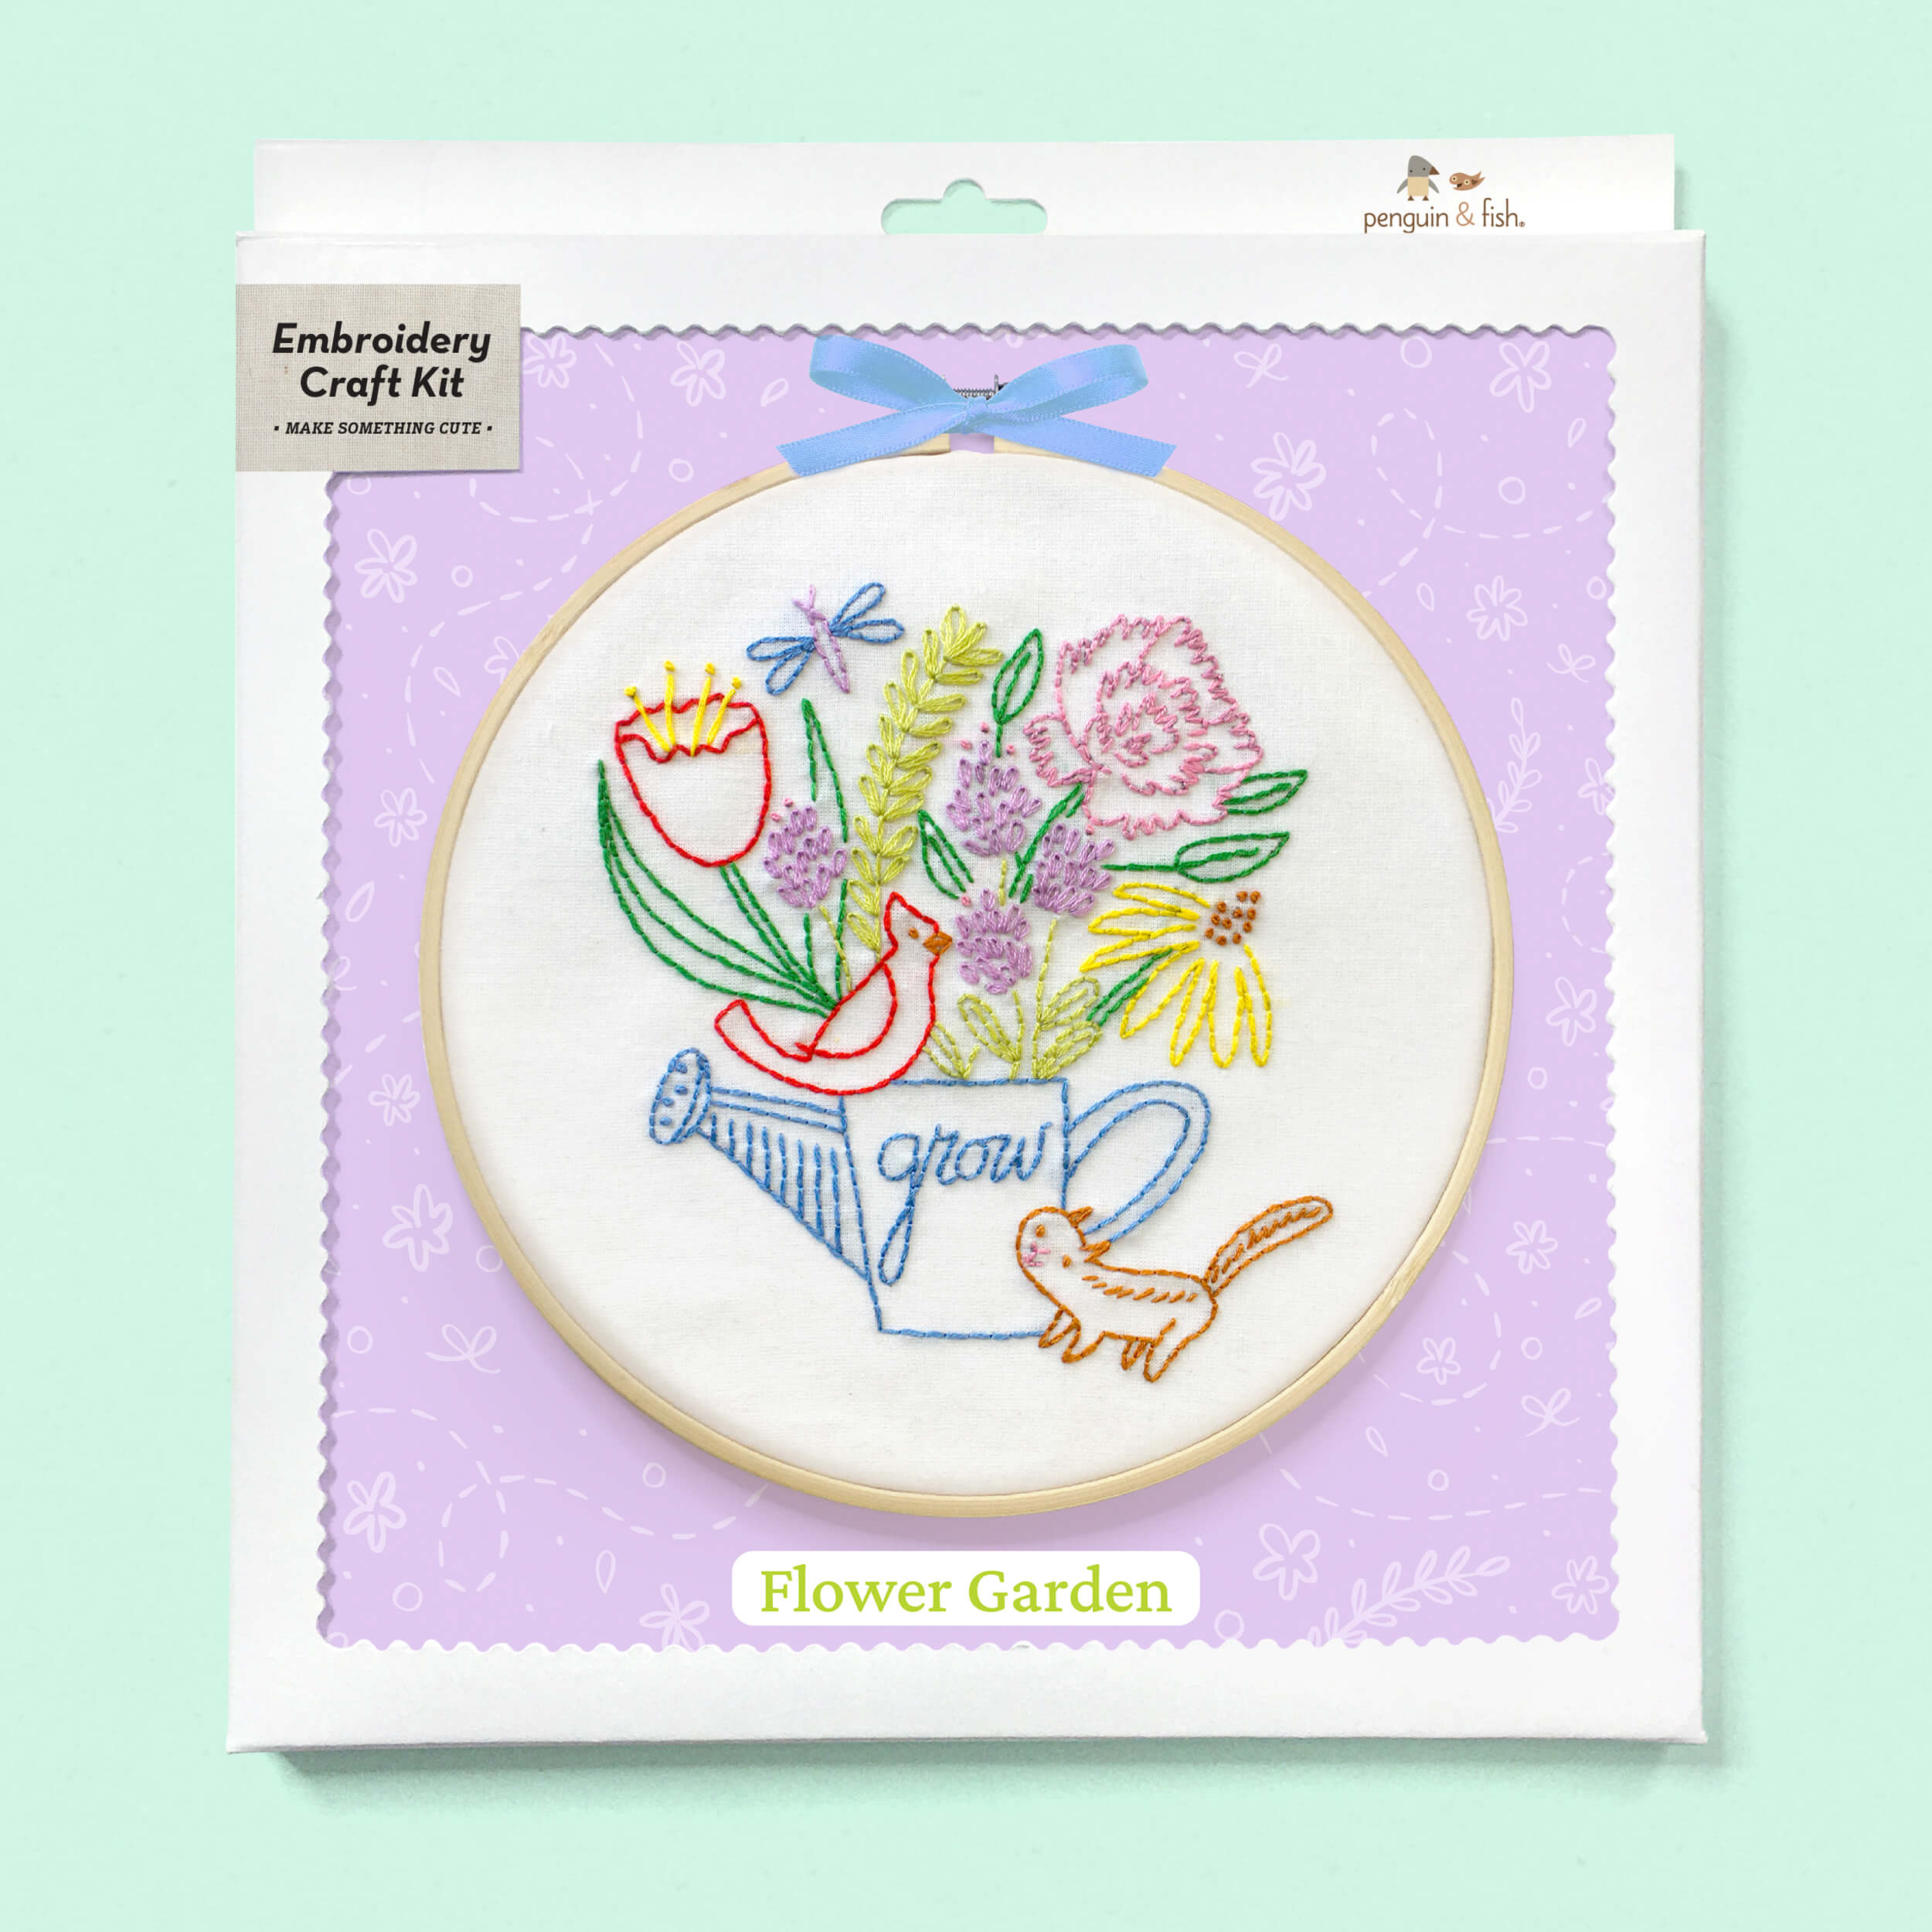 Flower Garden embroidery kit shown in a box